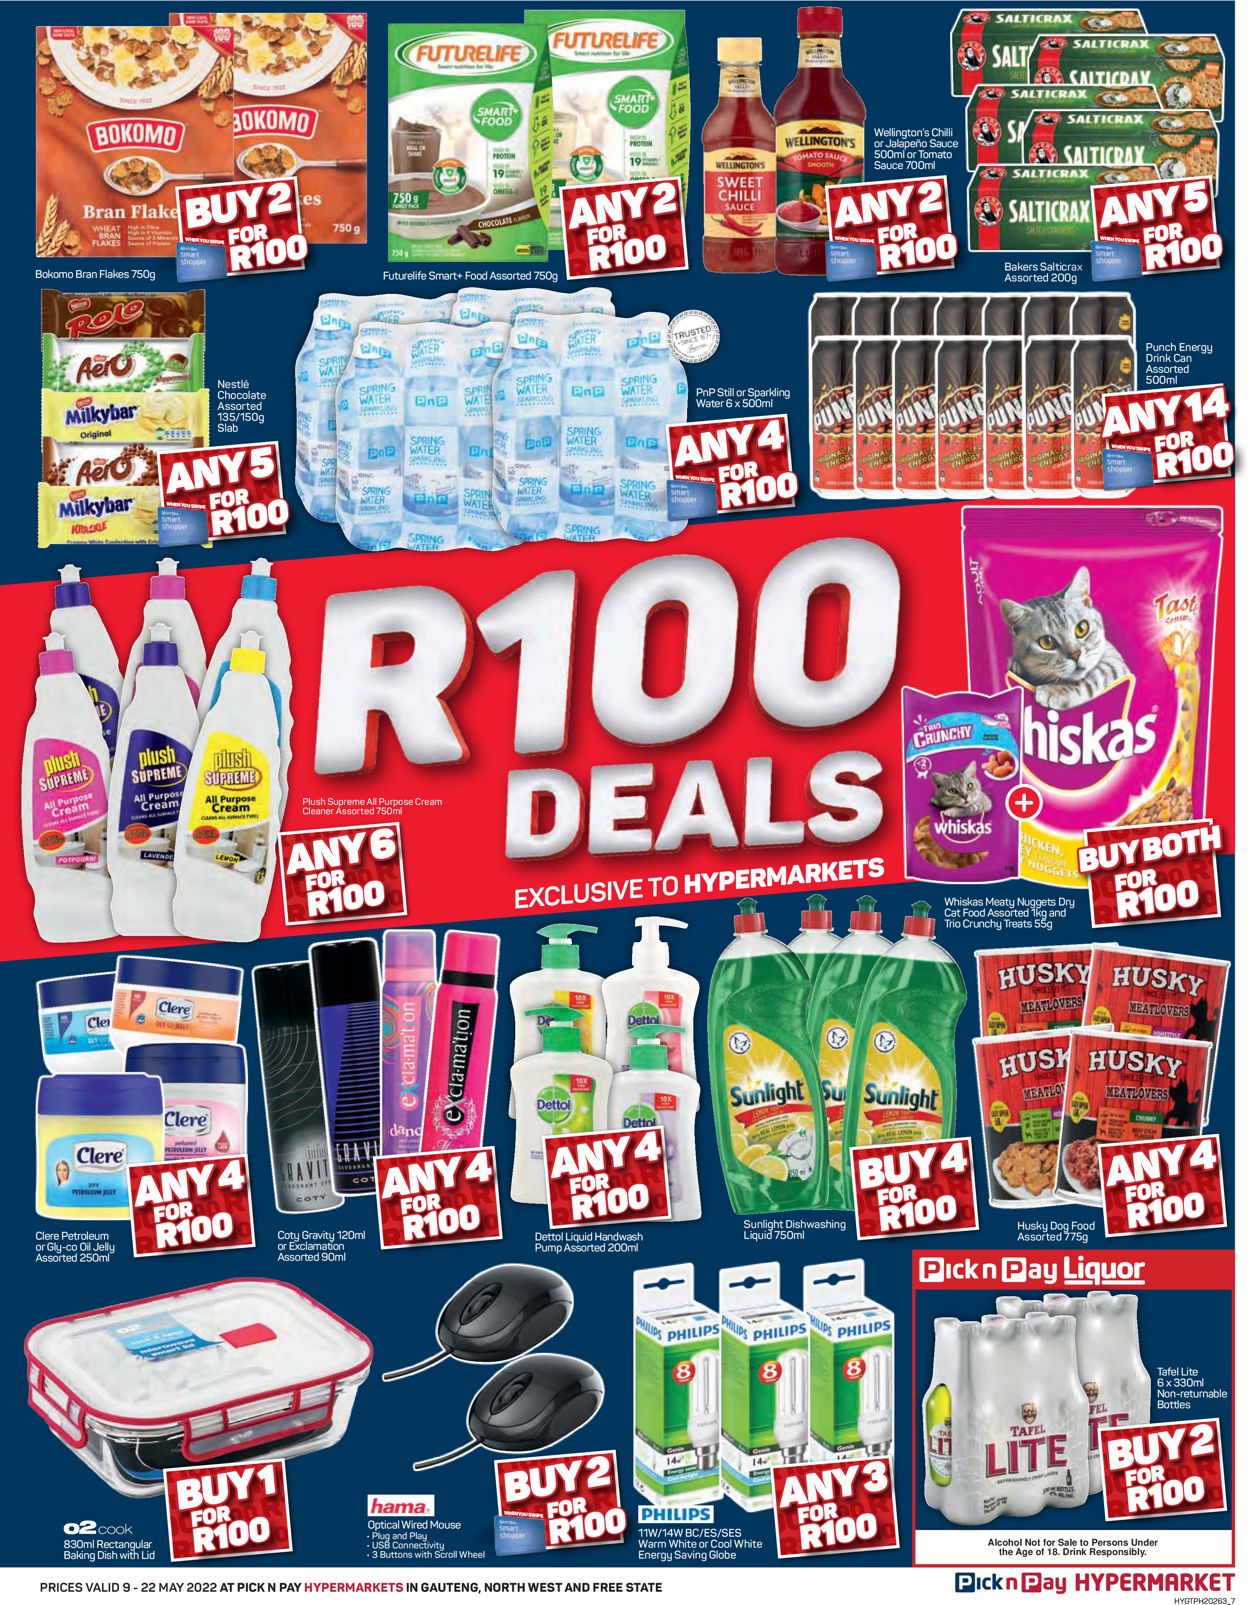 Pick n Pay Catalogue - 2022/05/09-2022/05/22 (Page 7)